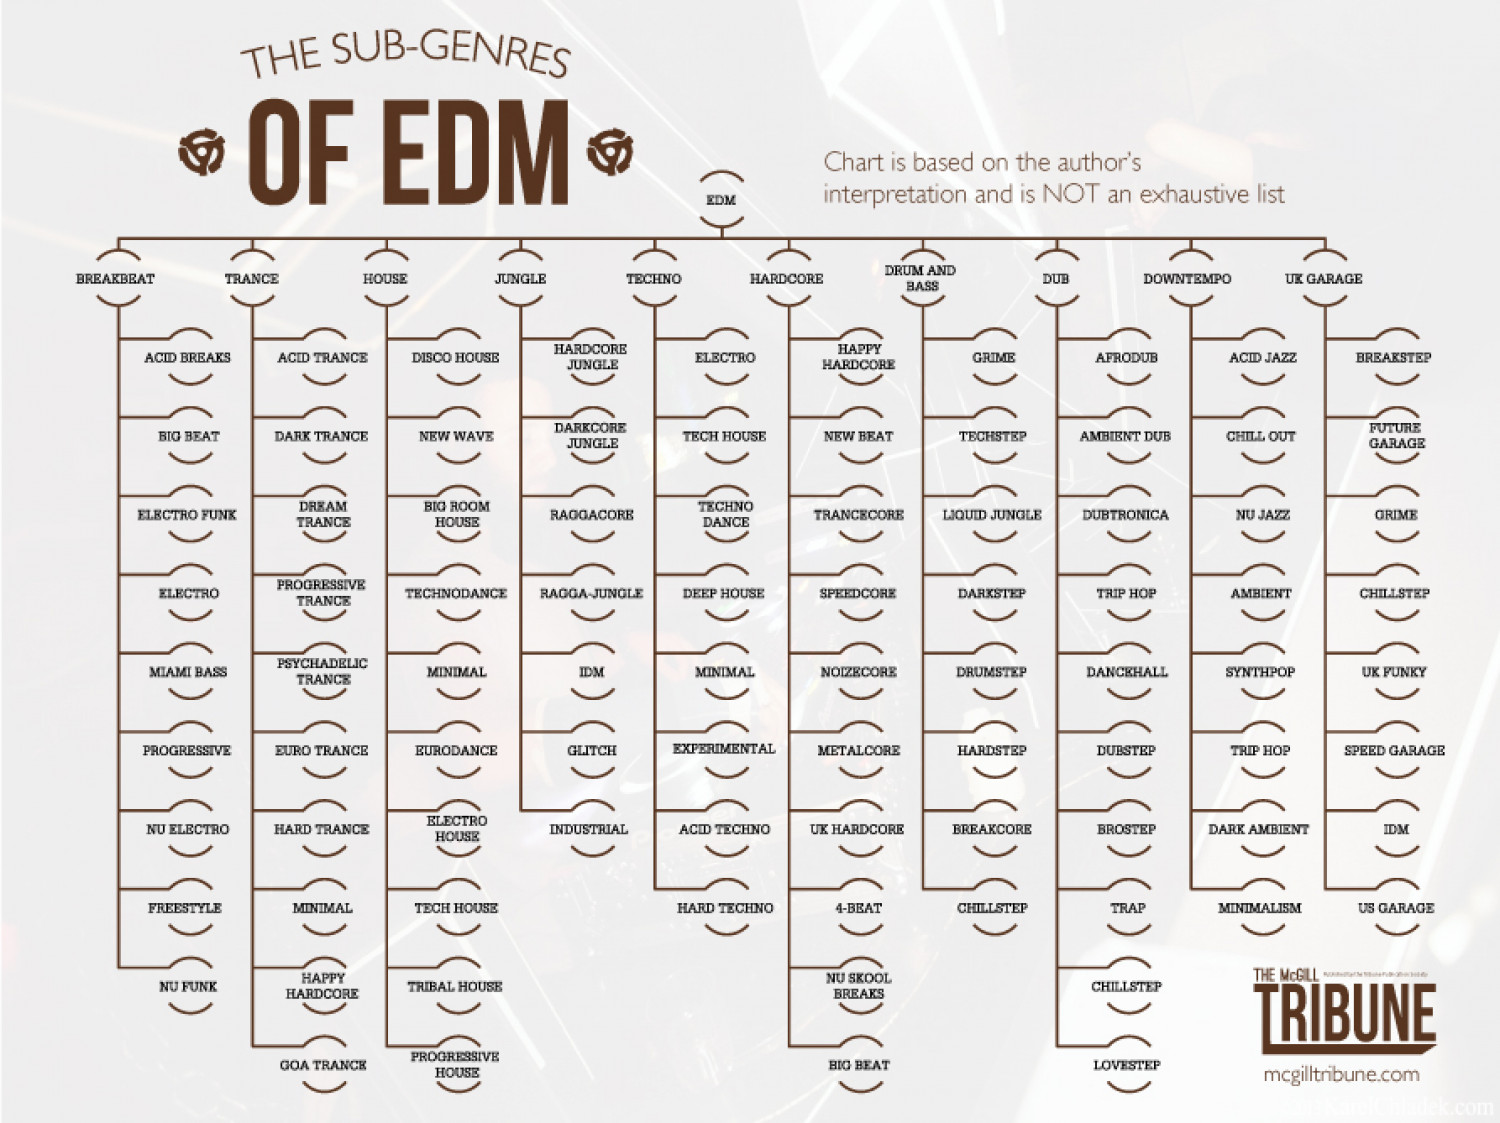 The Sub-Genres of EDM Infographic